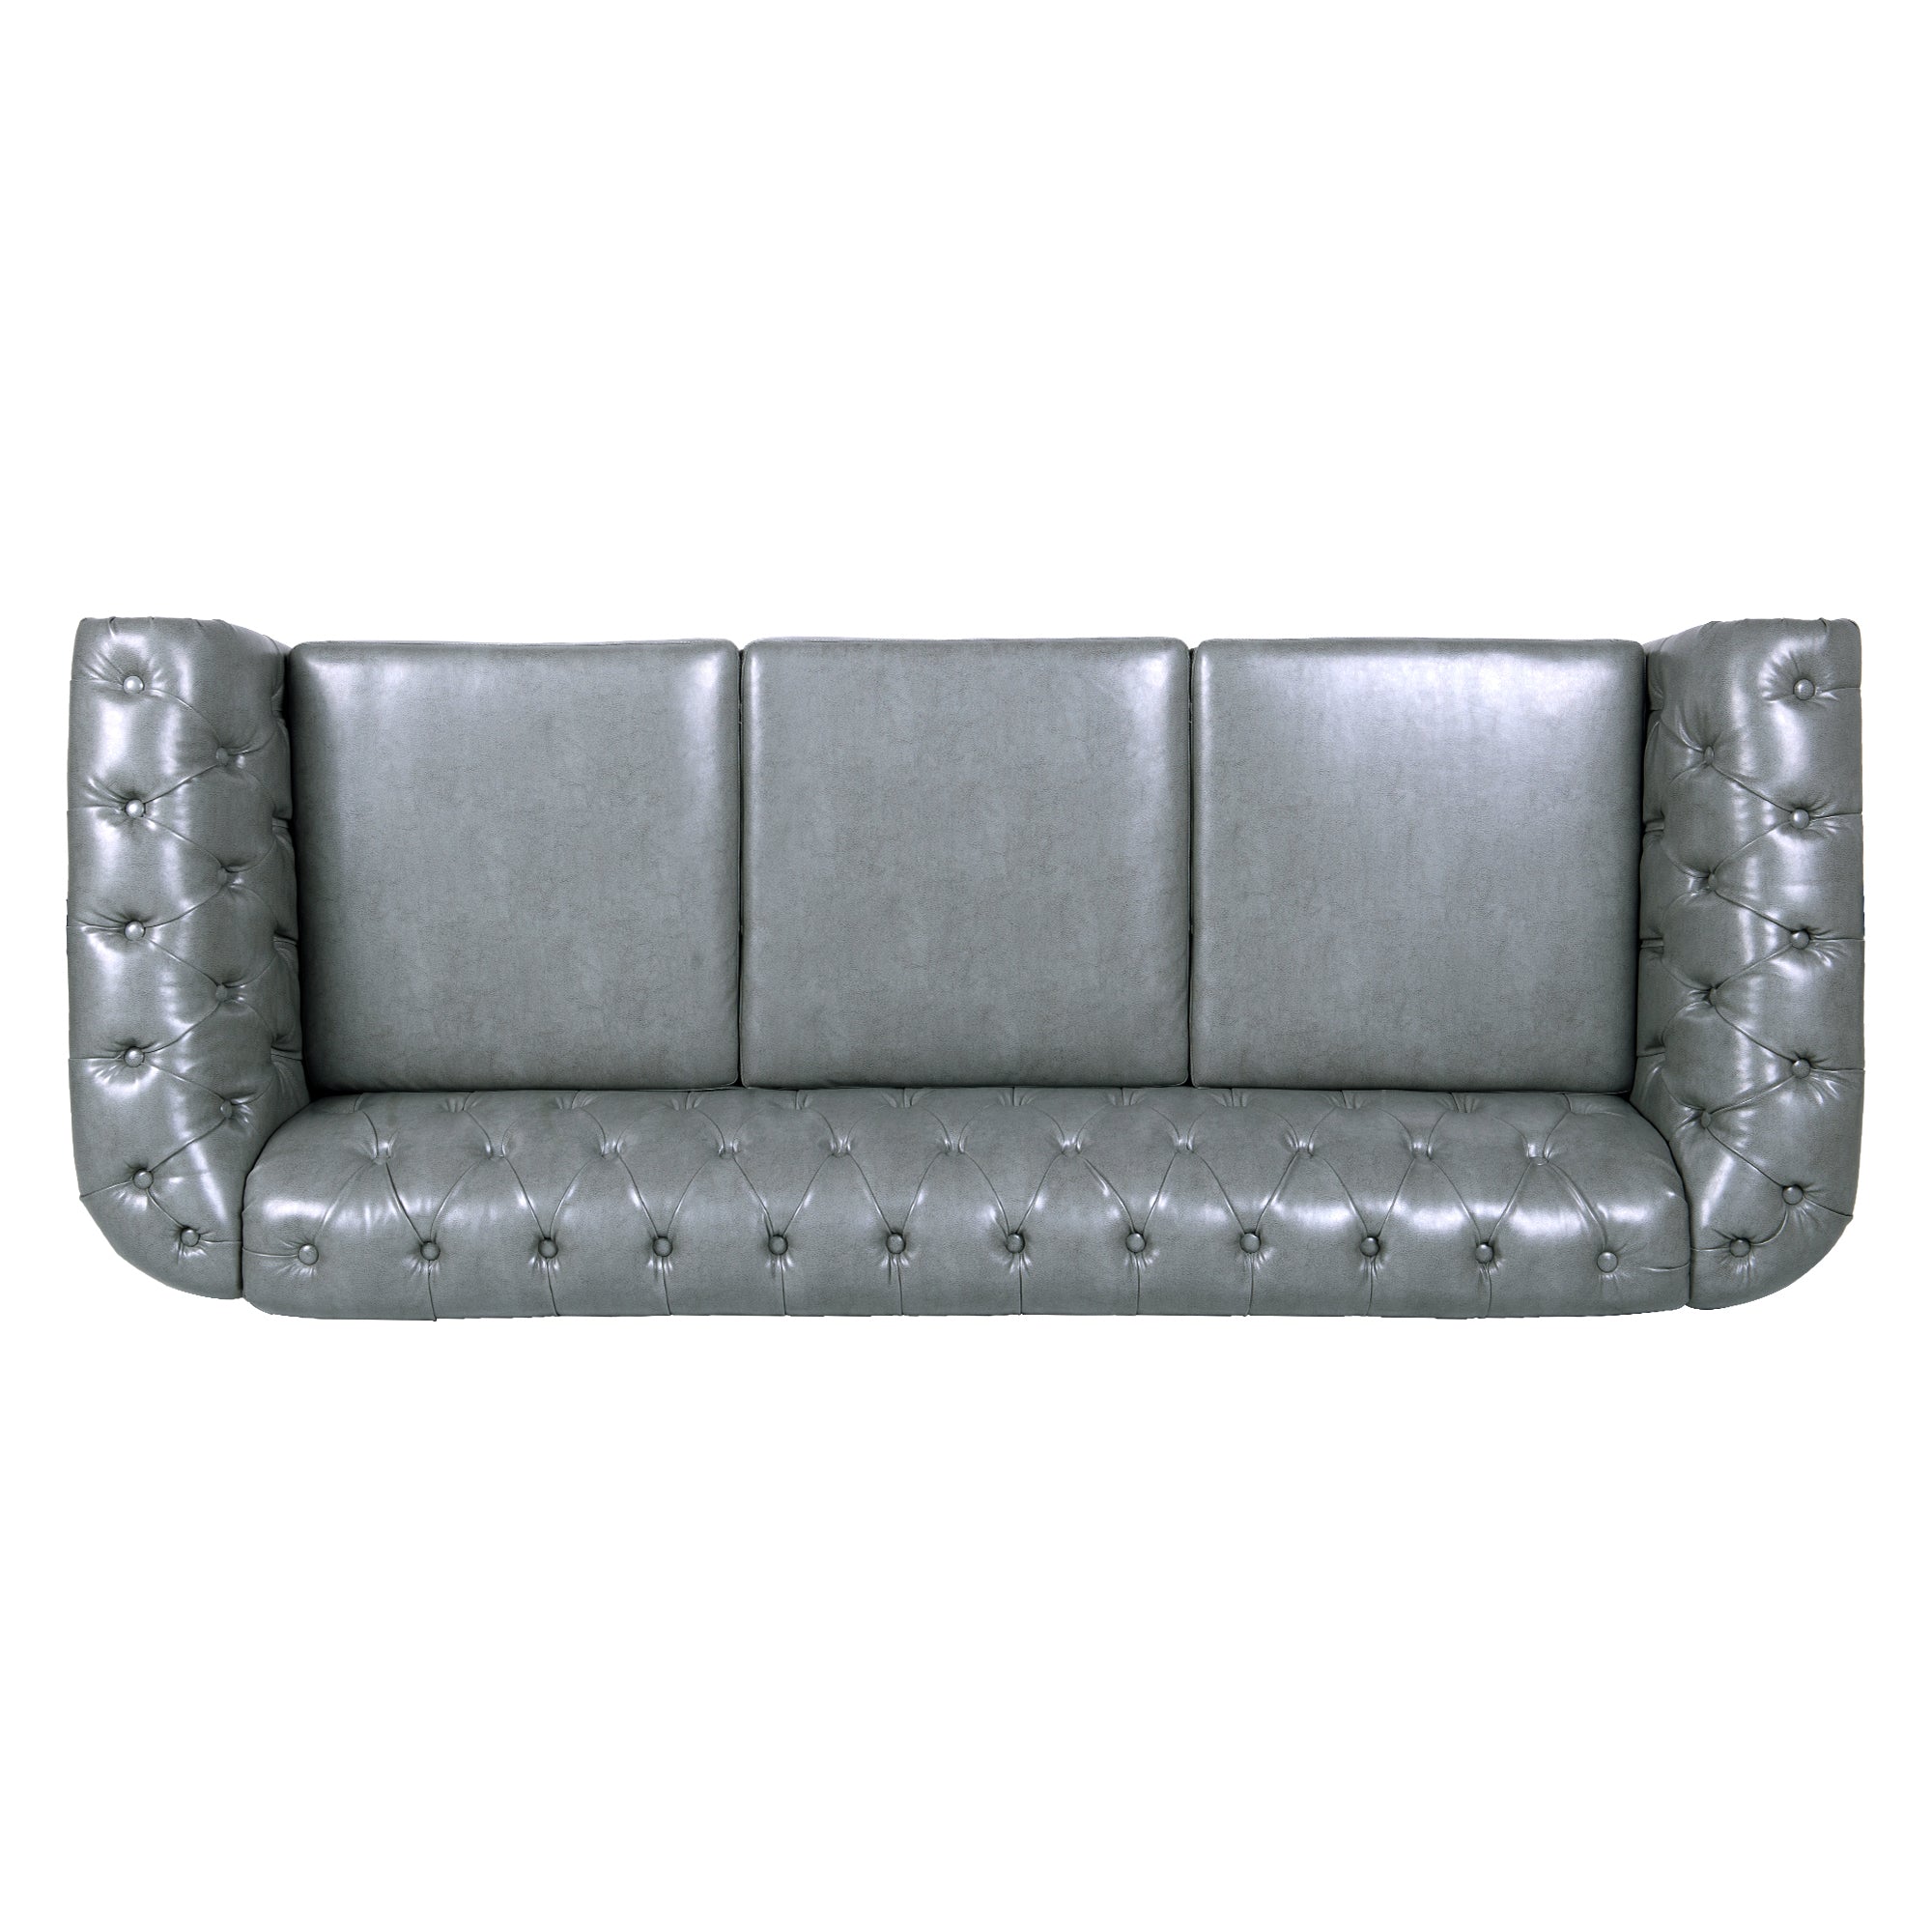 84" Gray Faux Leather Chesterfield Sofa With Nailhead Trim